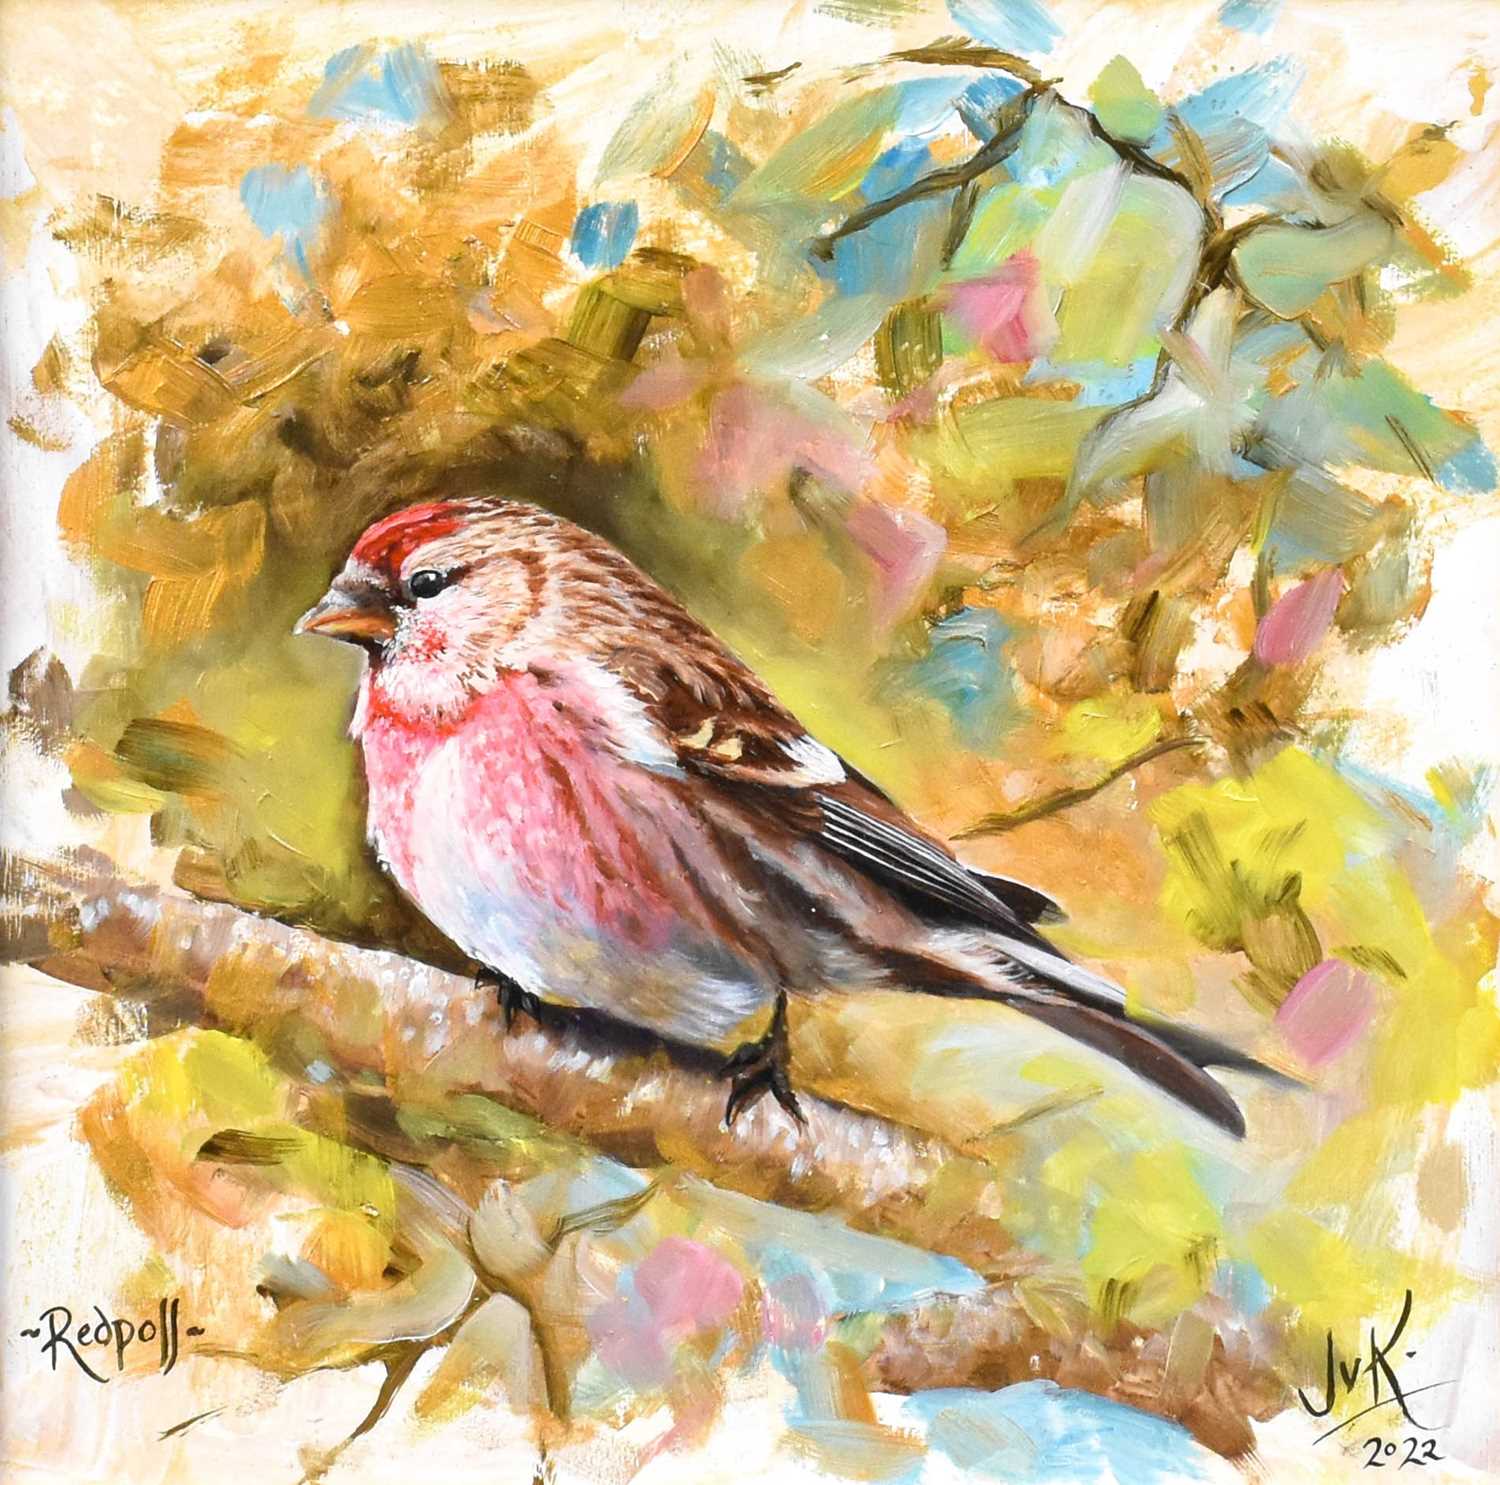 Jo Van Kampen (b.1968) "Redpoll" Signed, inscribed and dated 2022, oil on panel